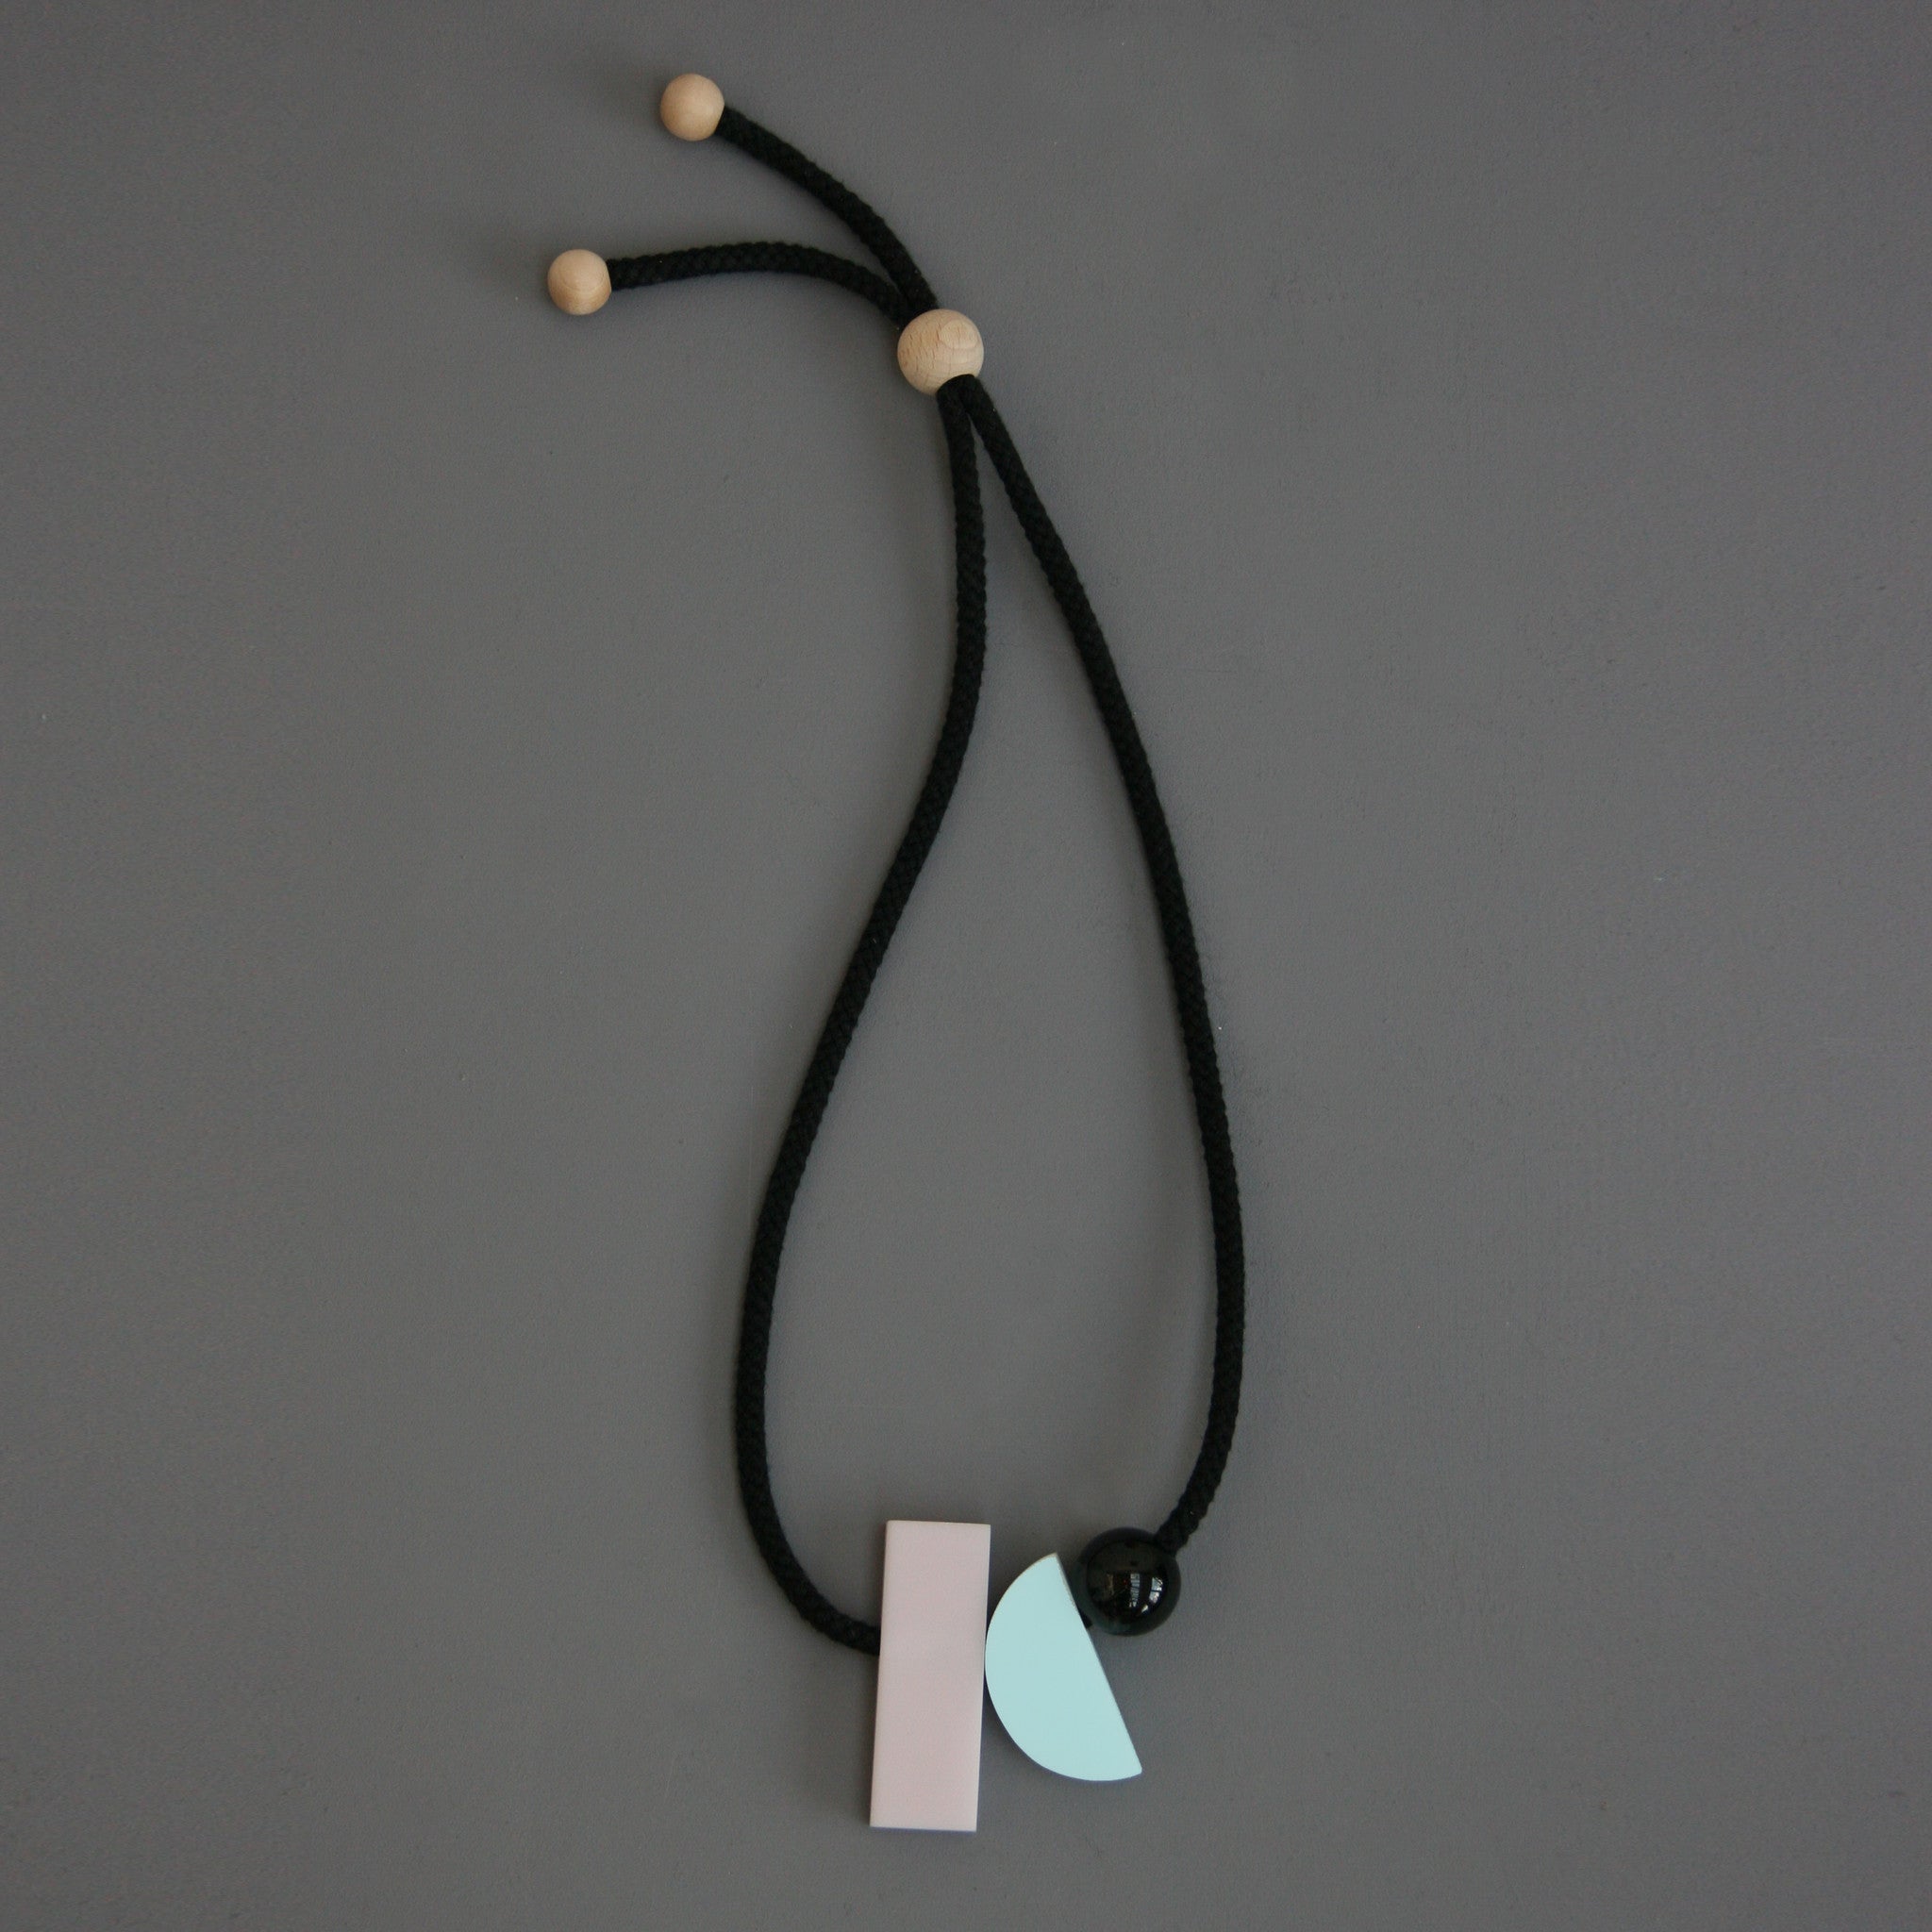 Dora is a fresh minimal and stylish necklace. The pastel colours and geometric shapes look great against a simple top. It hangs really nicely. Dora is composed of 3 parts. A pink rectangular resin section (70mm x 23mm), a pale blue resin curve (50mm x 23mm) and a small black resin ball (25mm). 